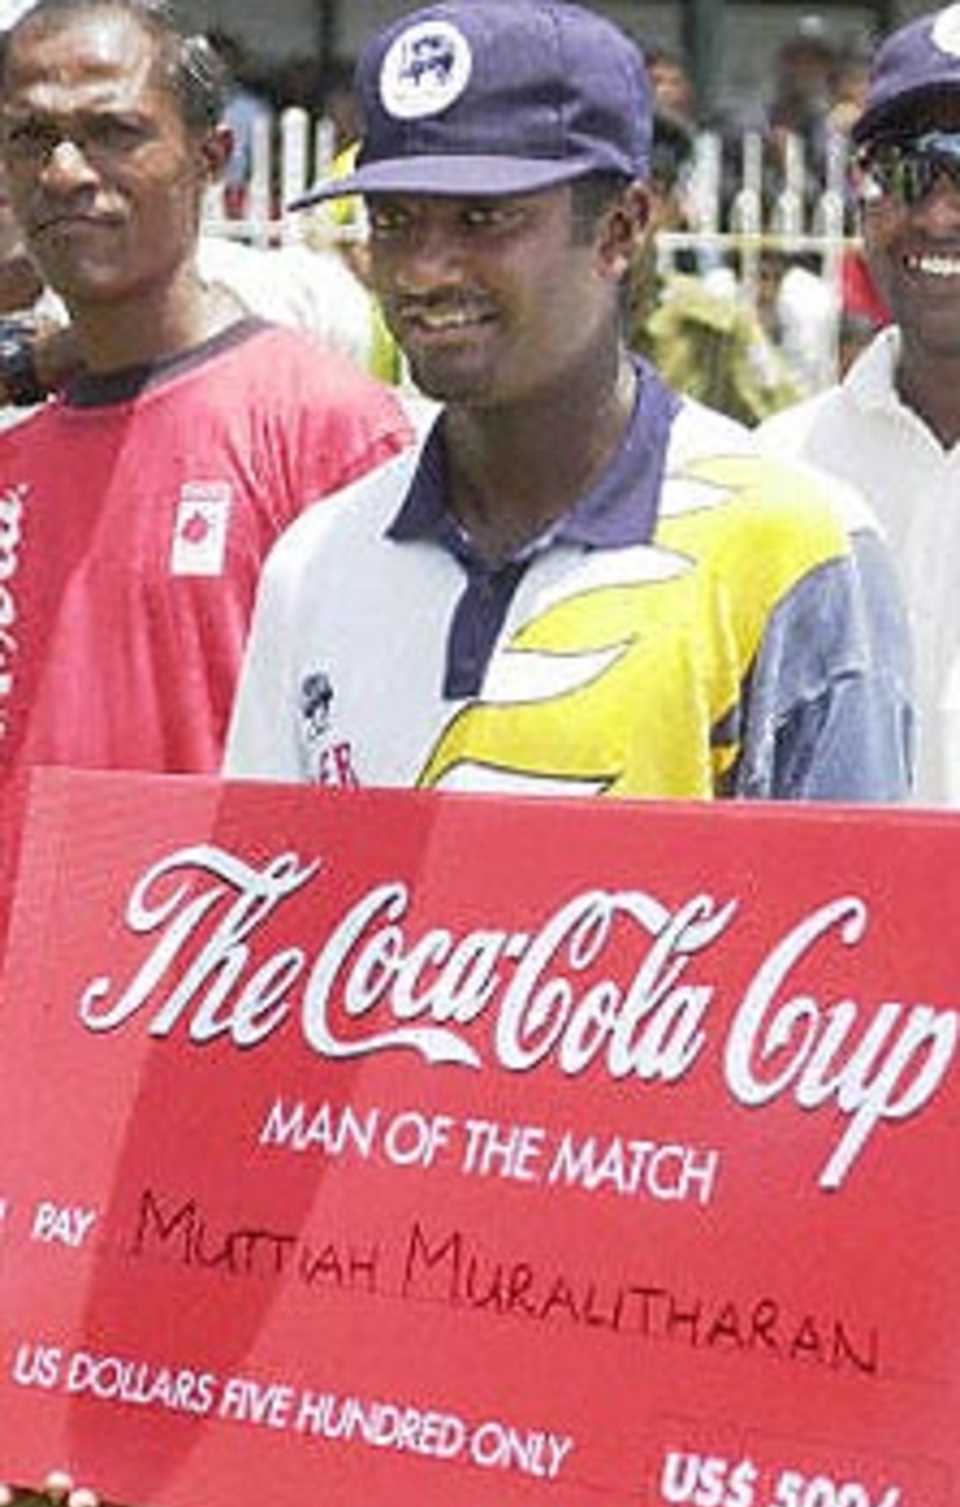 Muttiah Muralitharan once again collected the Man of the Match award